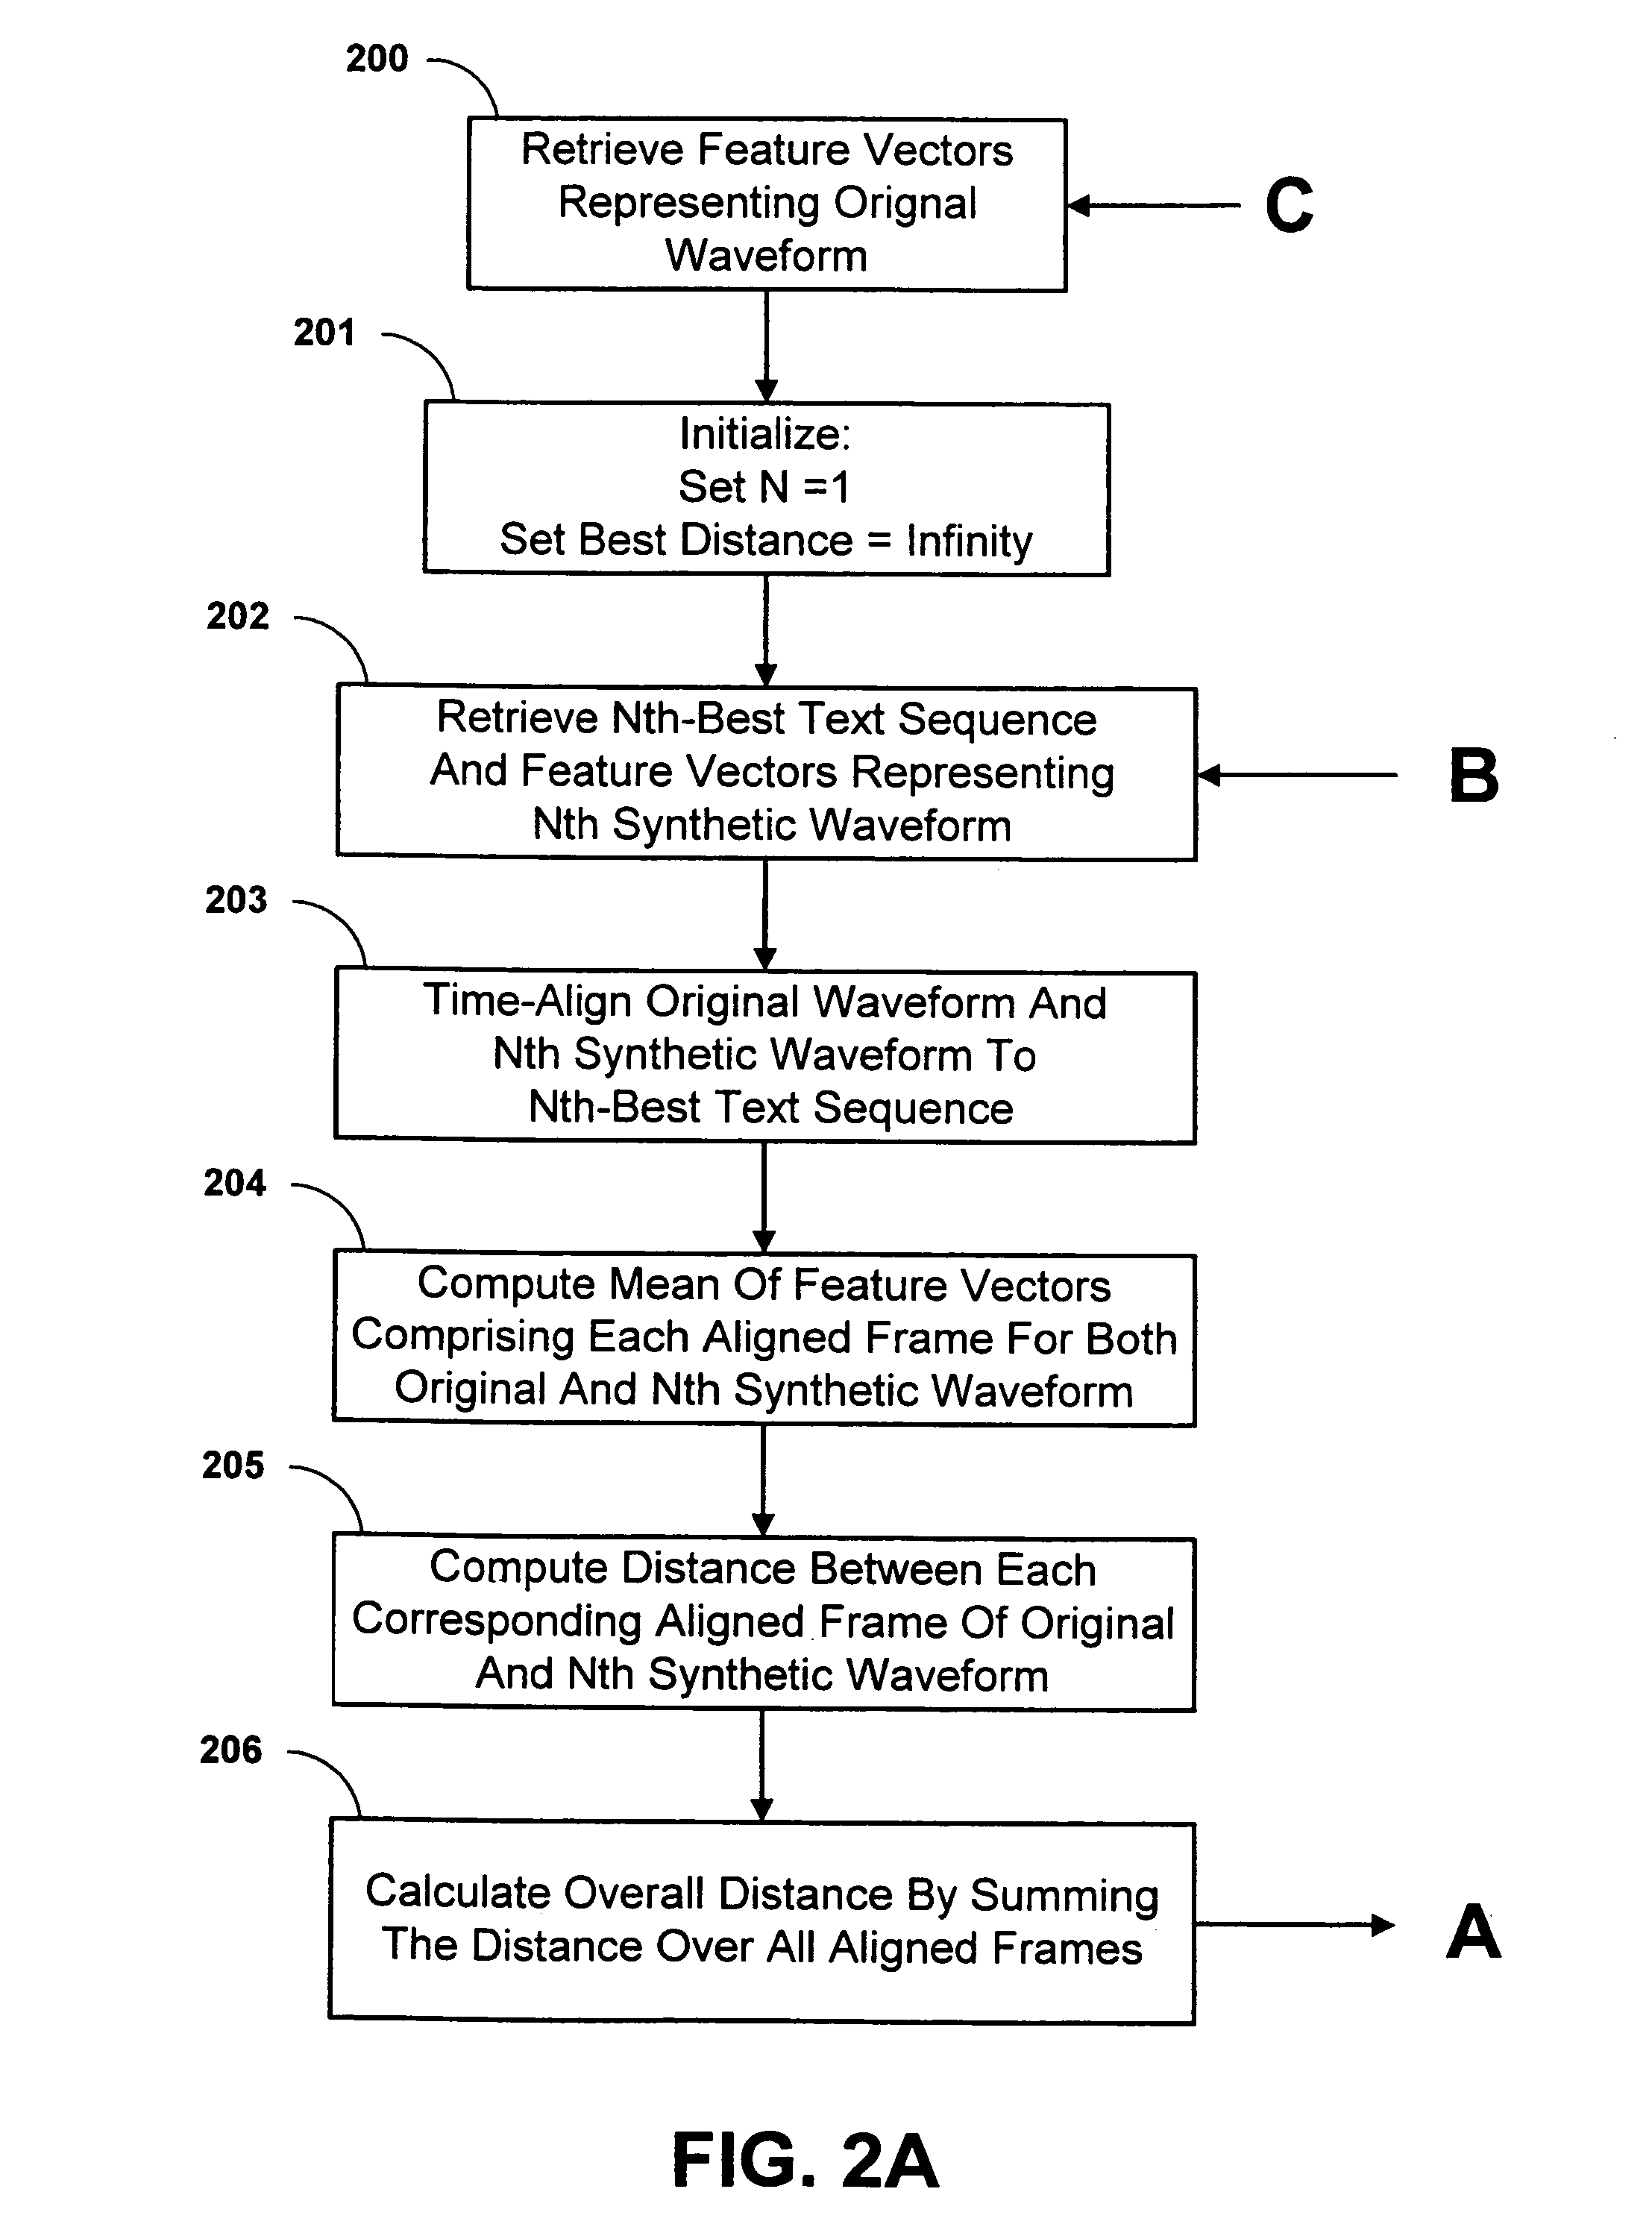 System and method for rescoring N-best hypotheses of an automatic speech recognition system